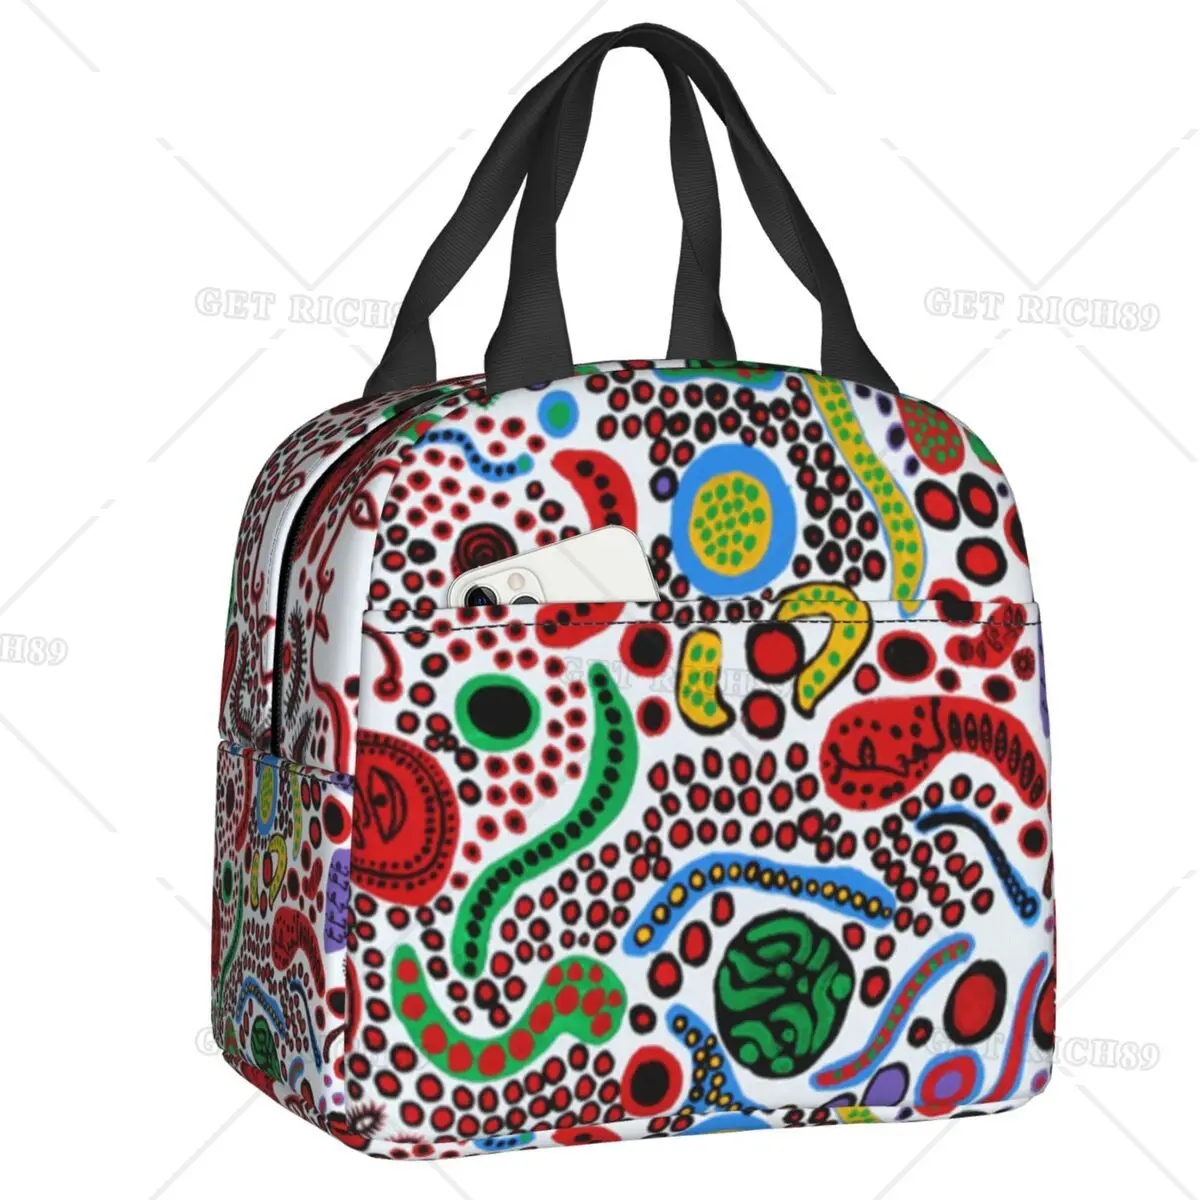 

Yayoi Kusama Abstract Art Insulated Lunch Bag for Women Resuable Thermal Cooler Lunch Box Kids School Work Food Picnic Tote Bags